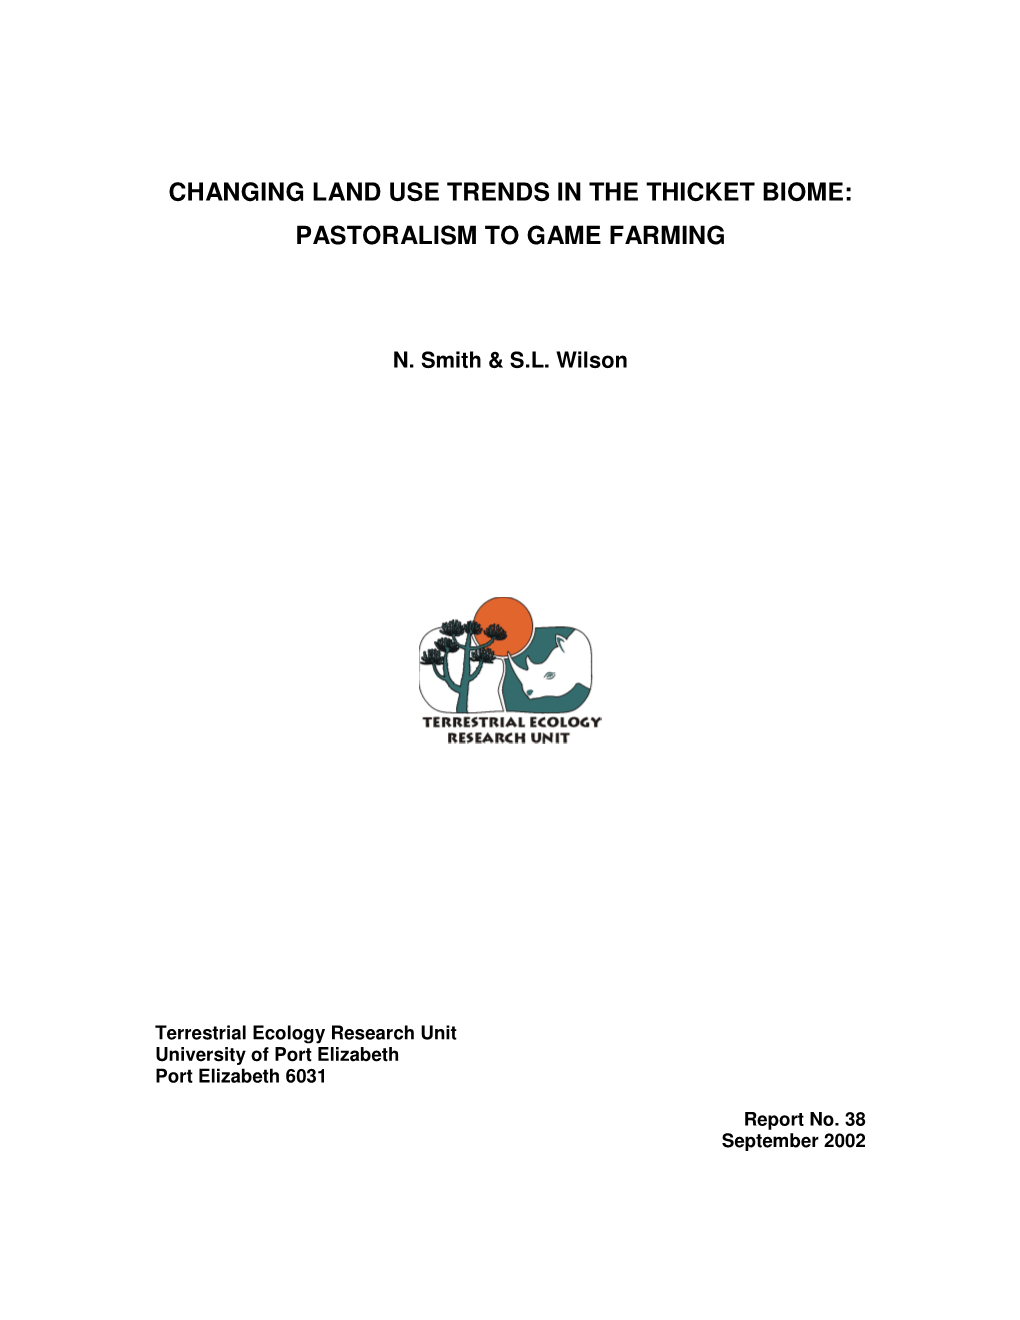 Changing Land Use Trends in the Thicket Biome: Pastoralism to Game Farming